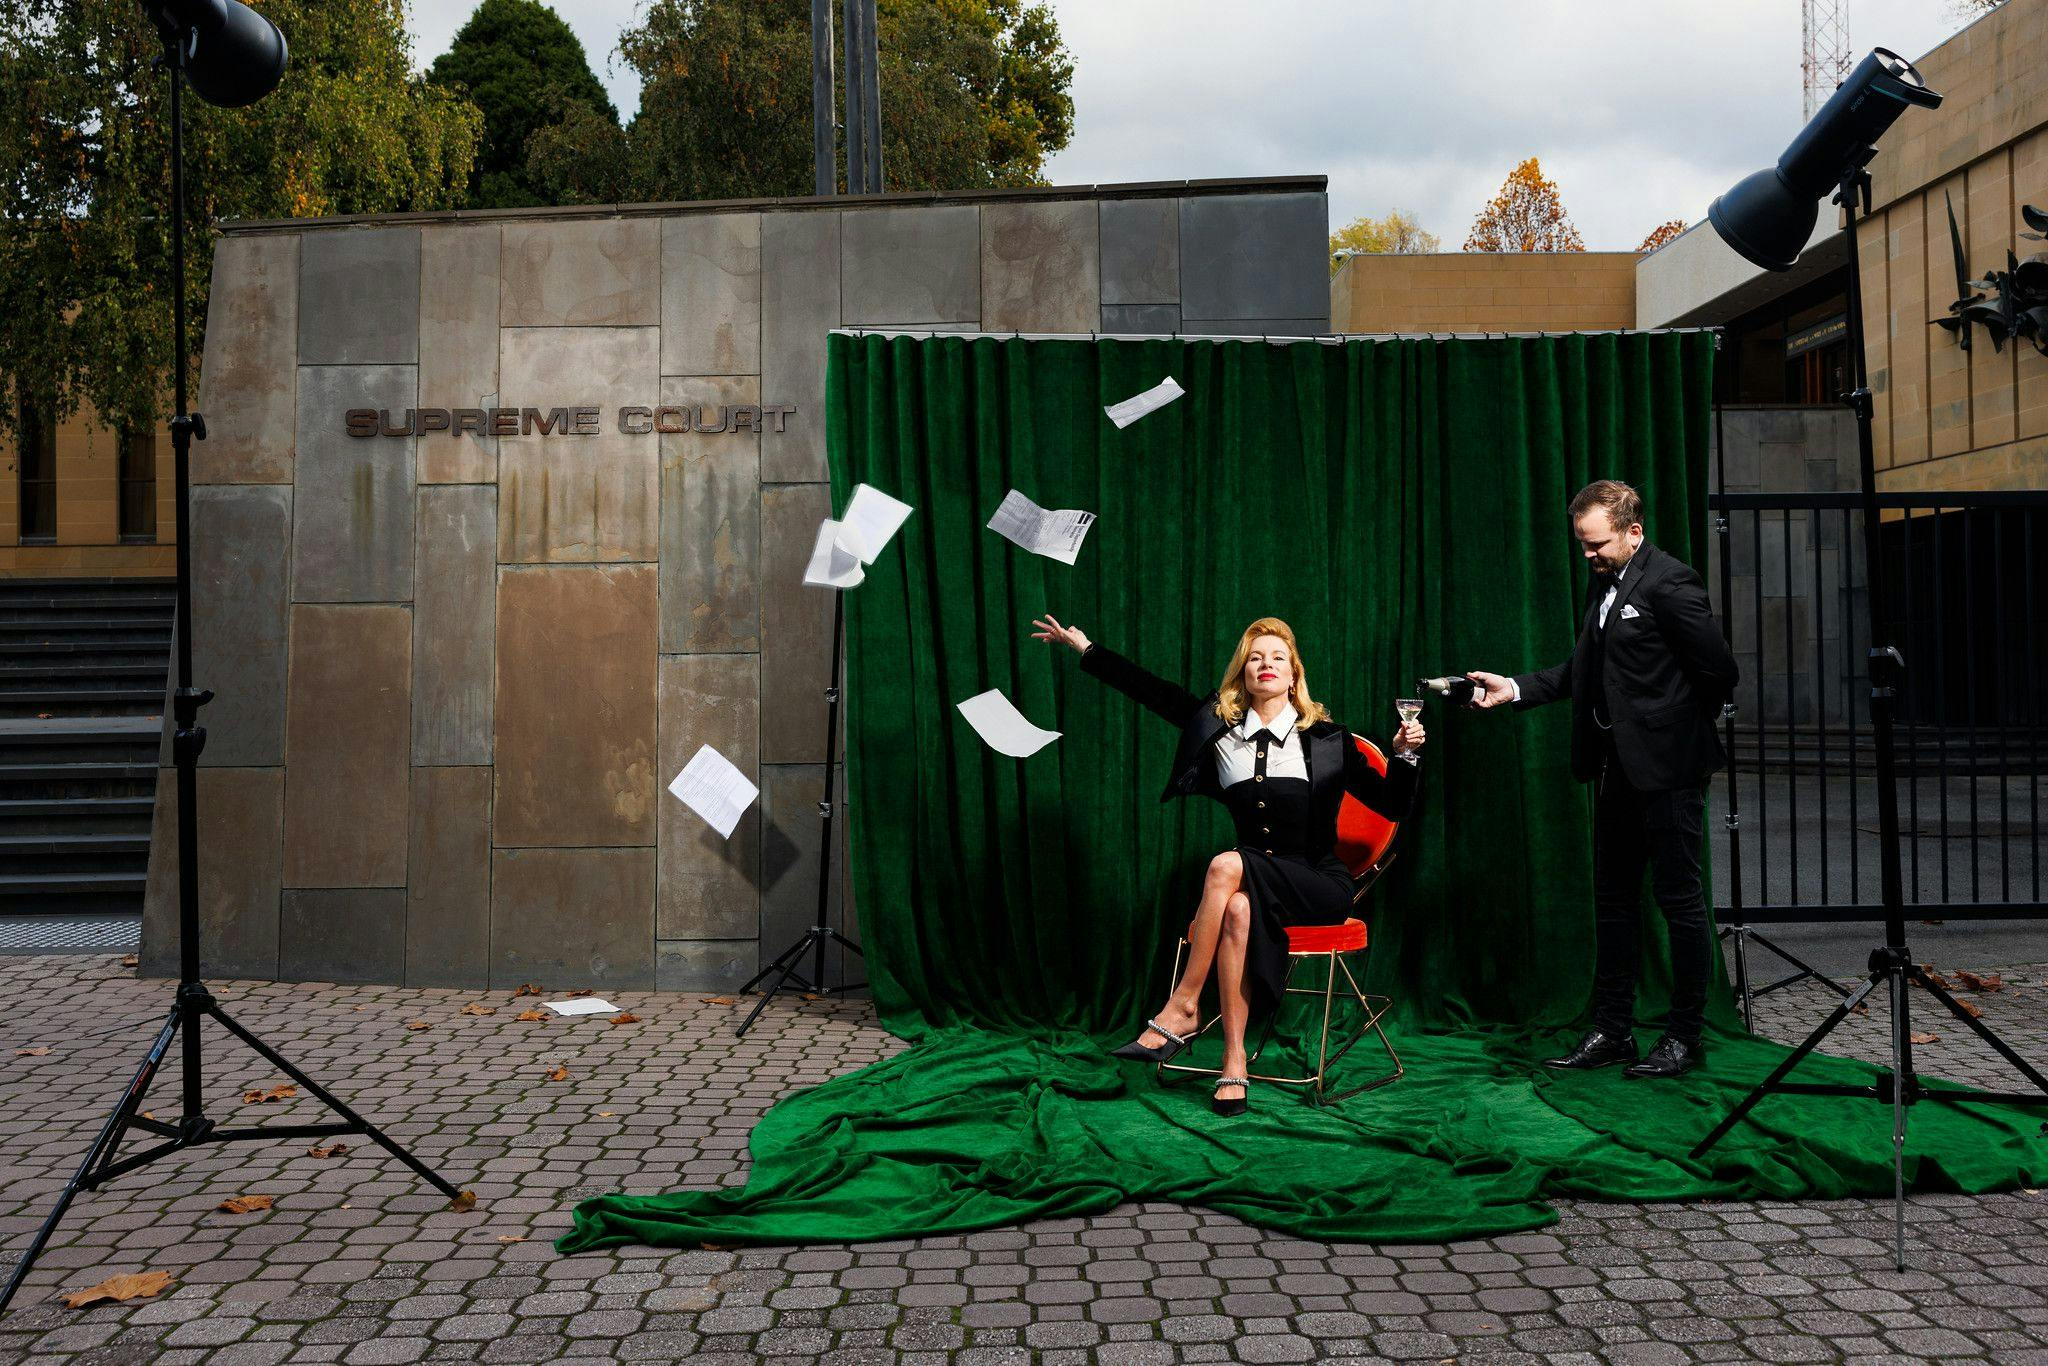 Kirsha in front of the Tasmania supreme court through documents in the air whilst being poured champagne by a male servant